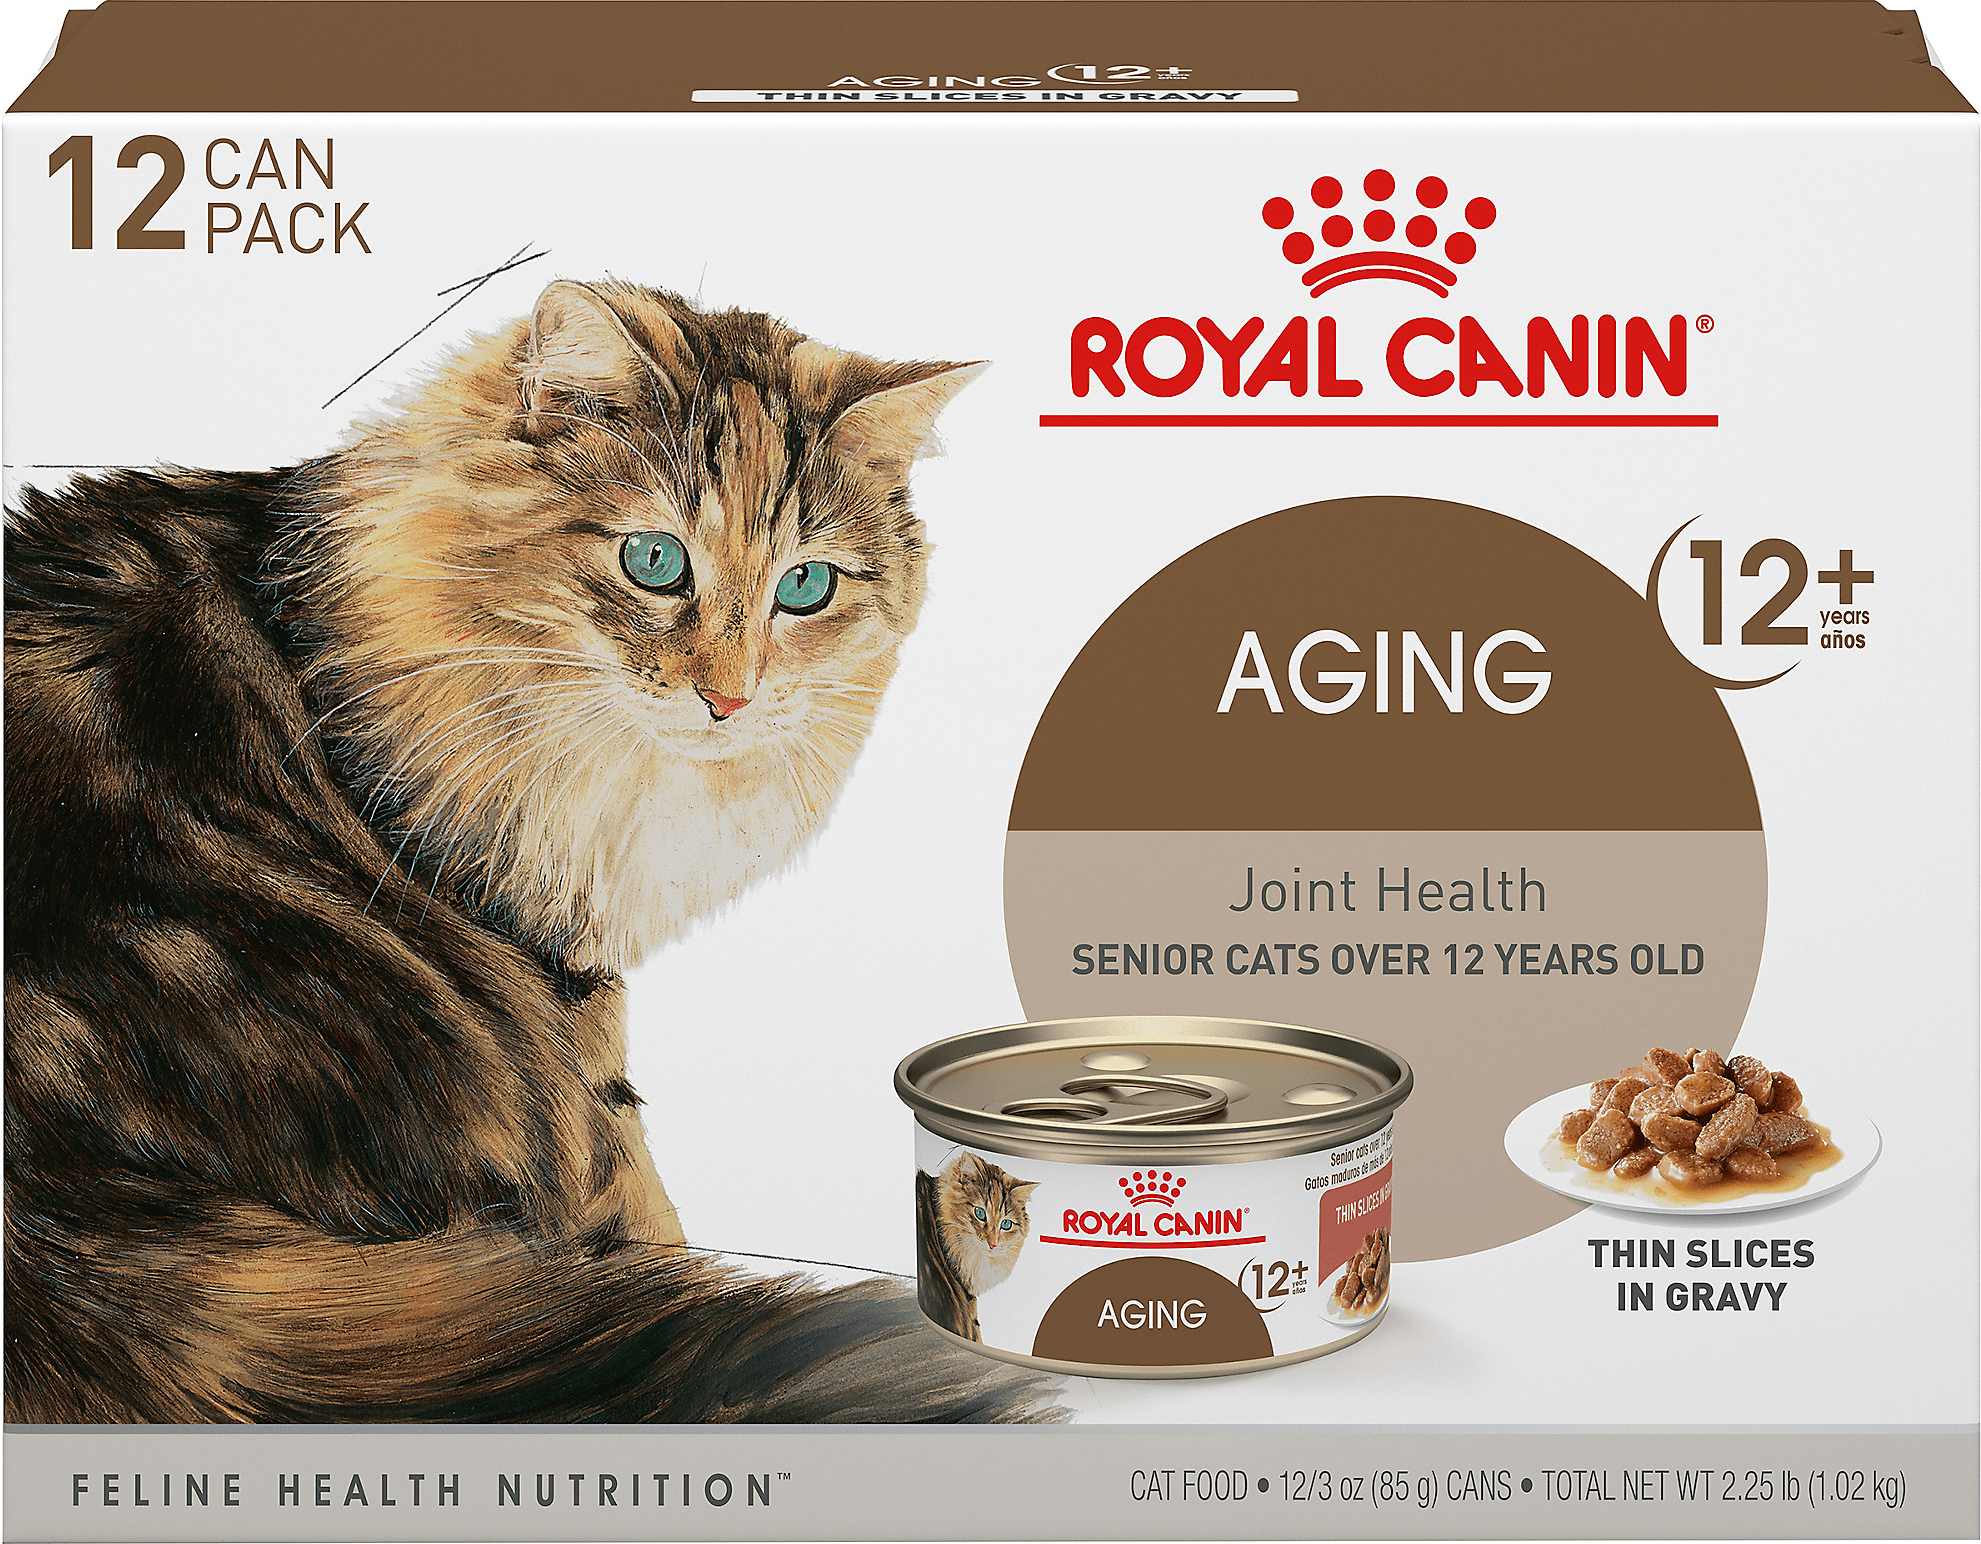 Royal Canin Aging 12+ Thin Slices In Gravy